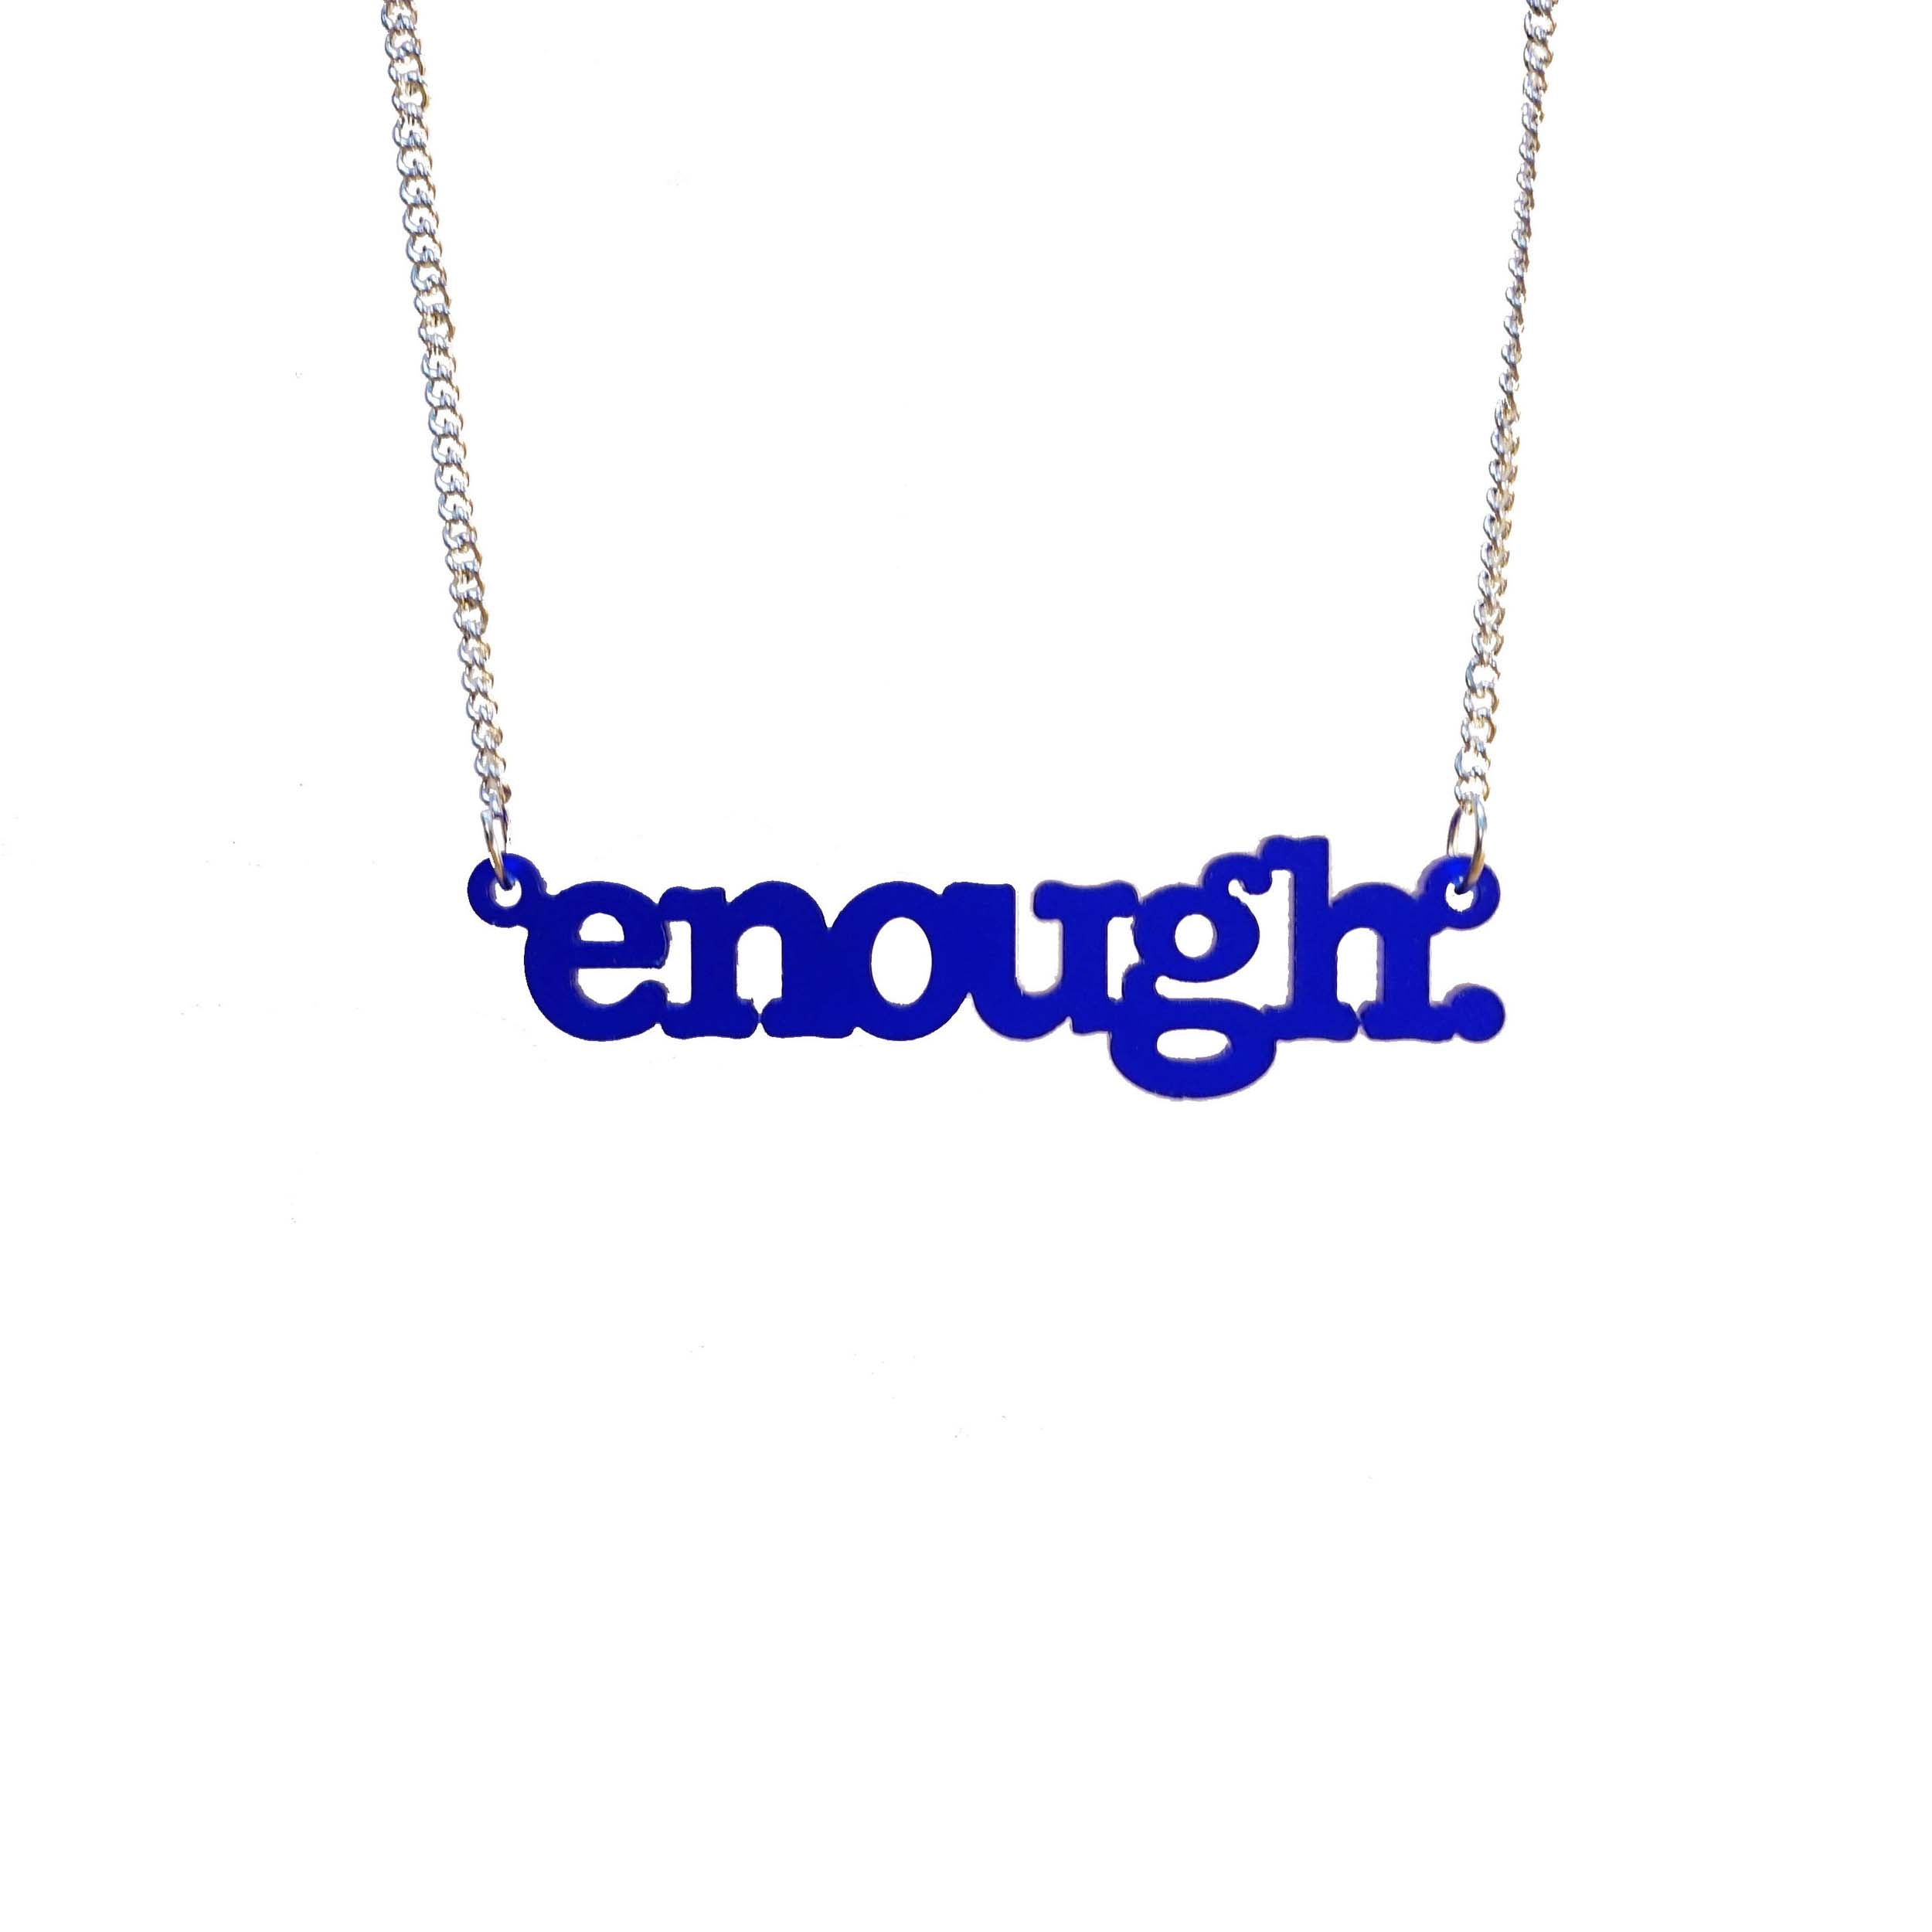 Enough necklace designed by Sarah Day for Wear and Resist. Enough is enough and you are enough, just as you are. £2 goest to Woman's Trust. 